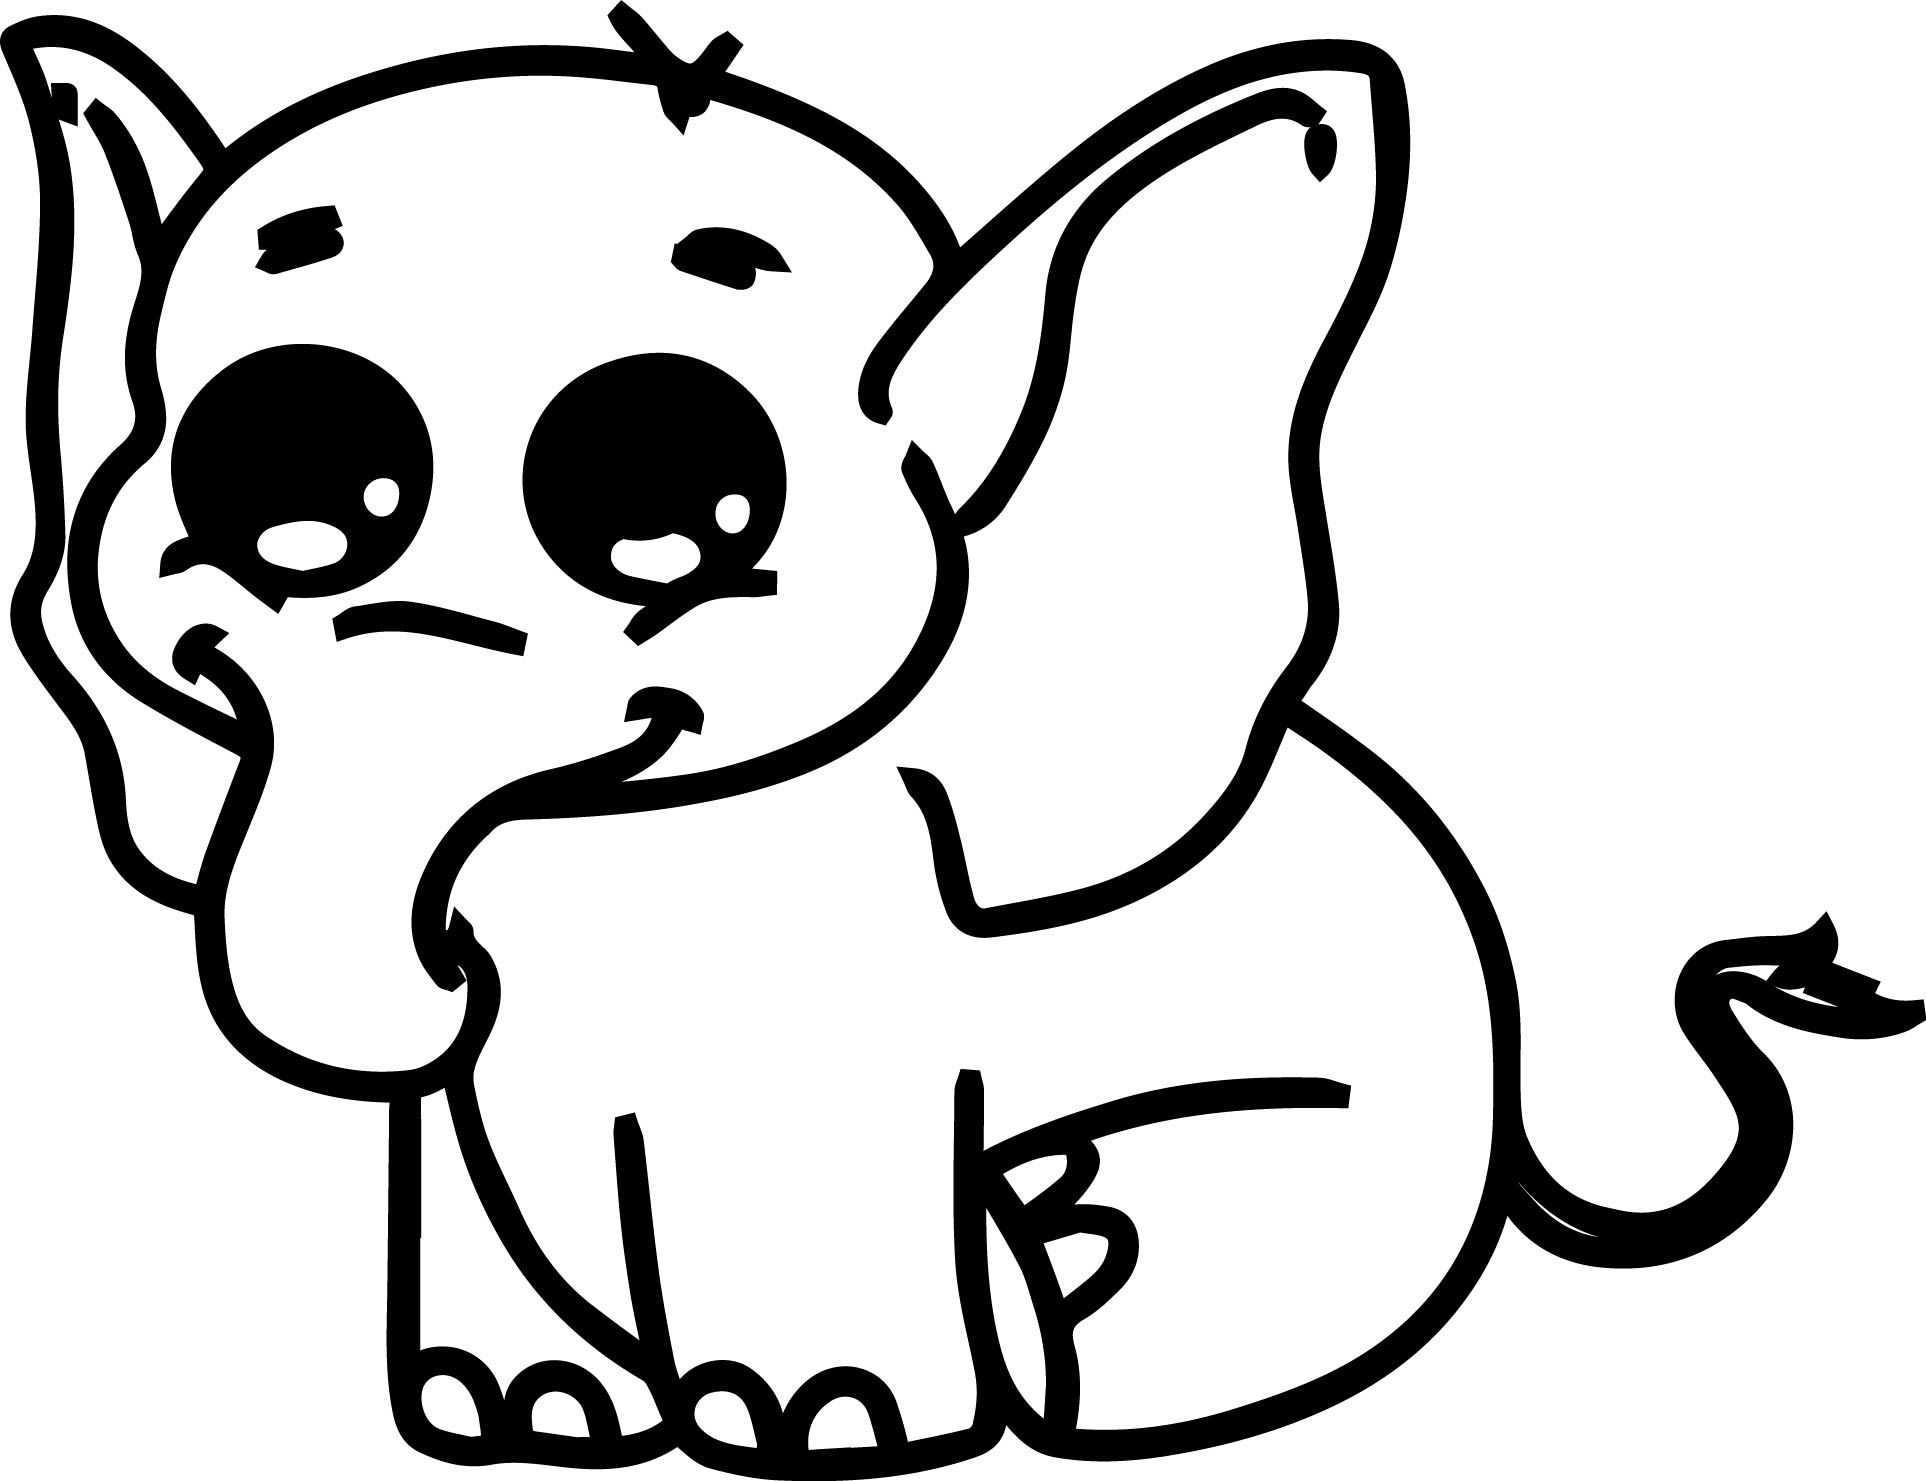 Coloring Page Elephant Kawaii : Baby elephant coloring pages to